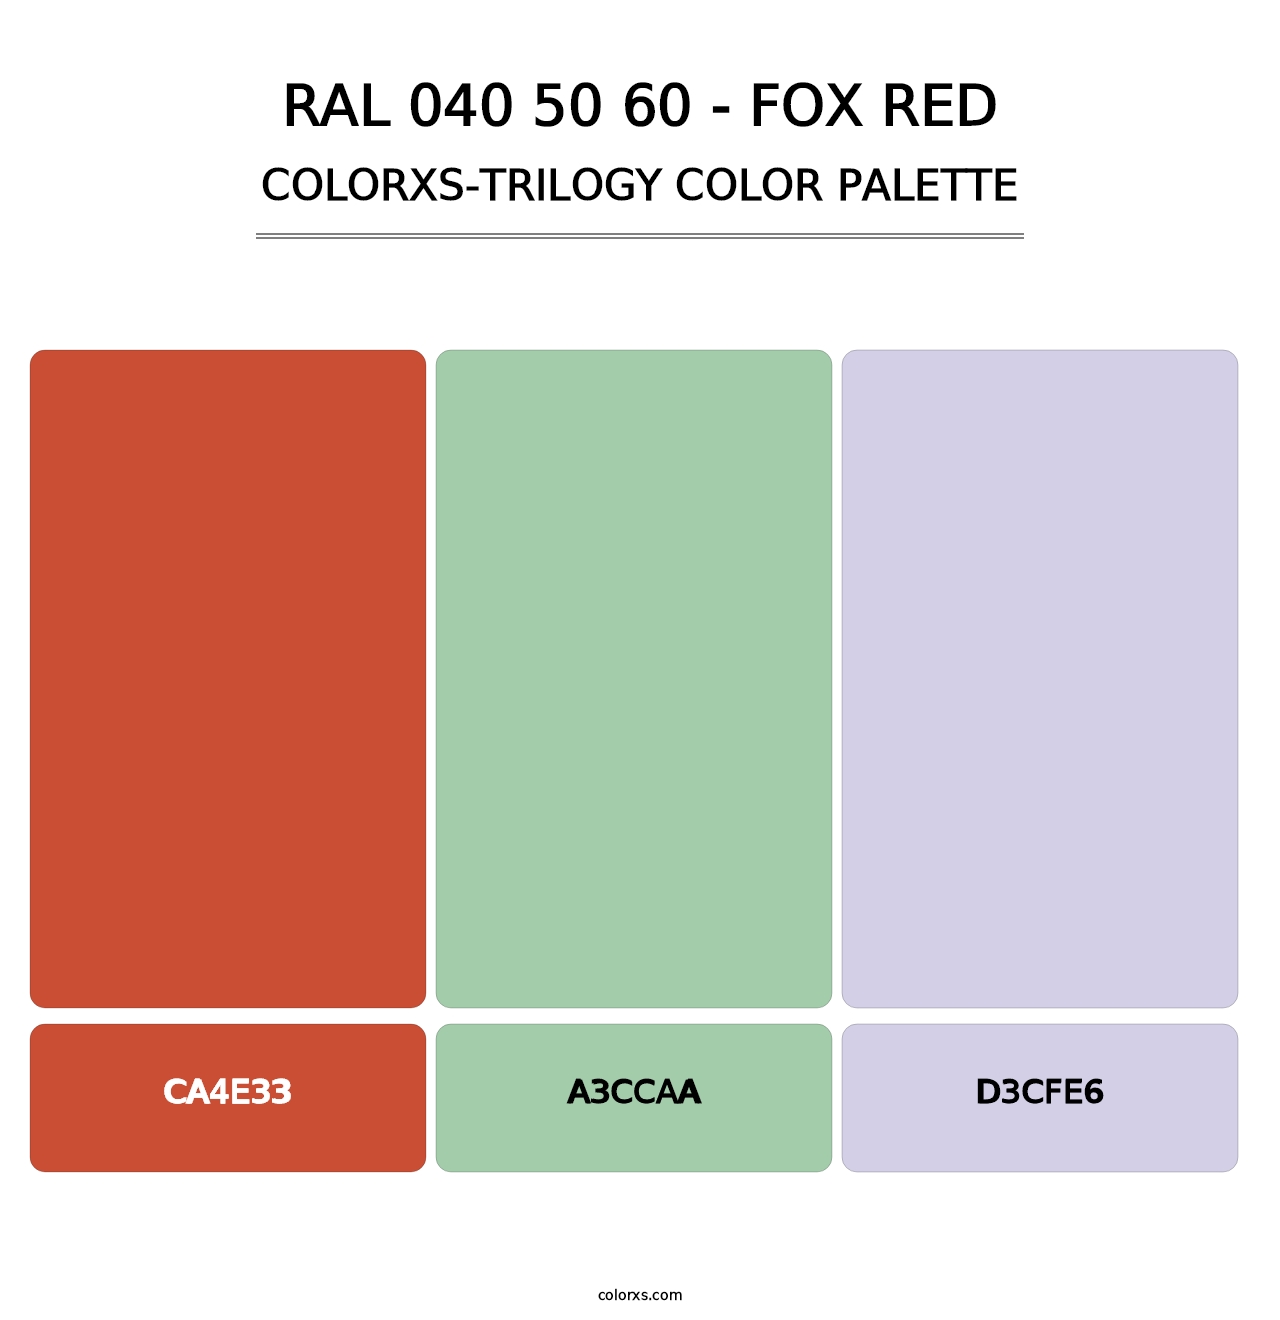 RAL 040 50 60 - Fox Red - Colorxs Trilogy Palette